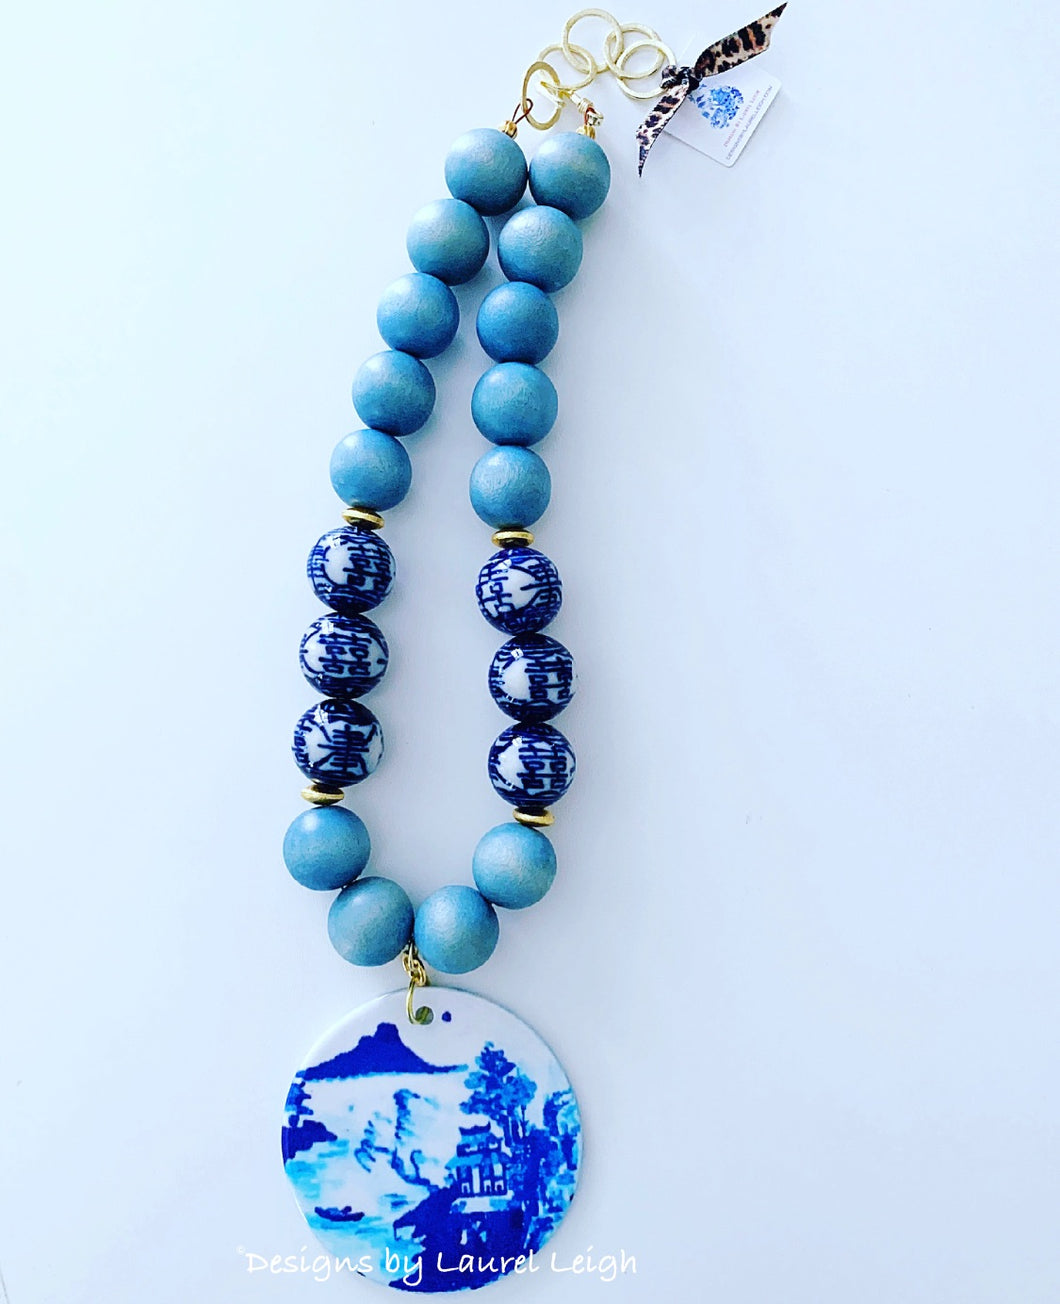 Chinoiserie Canton Watercolor Pendant Statement Necklace - Spa Blue - Ginger jar